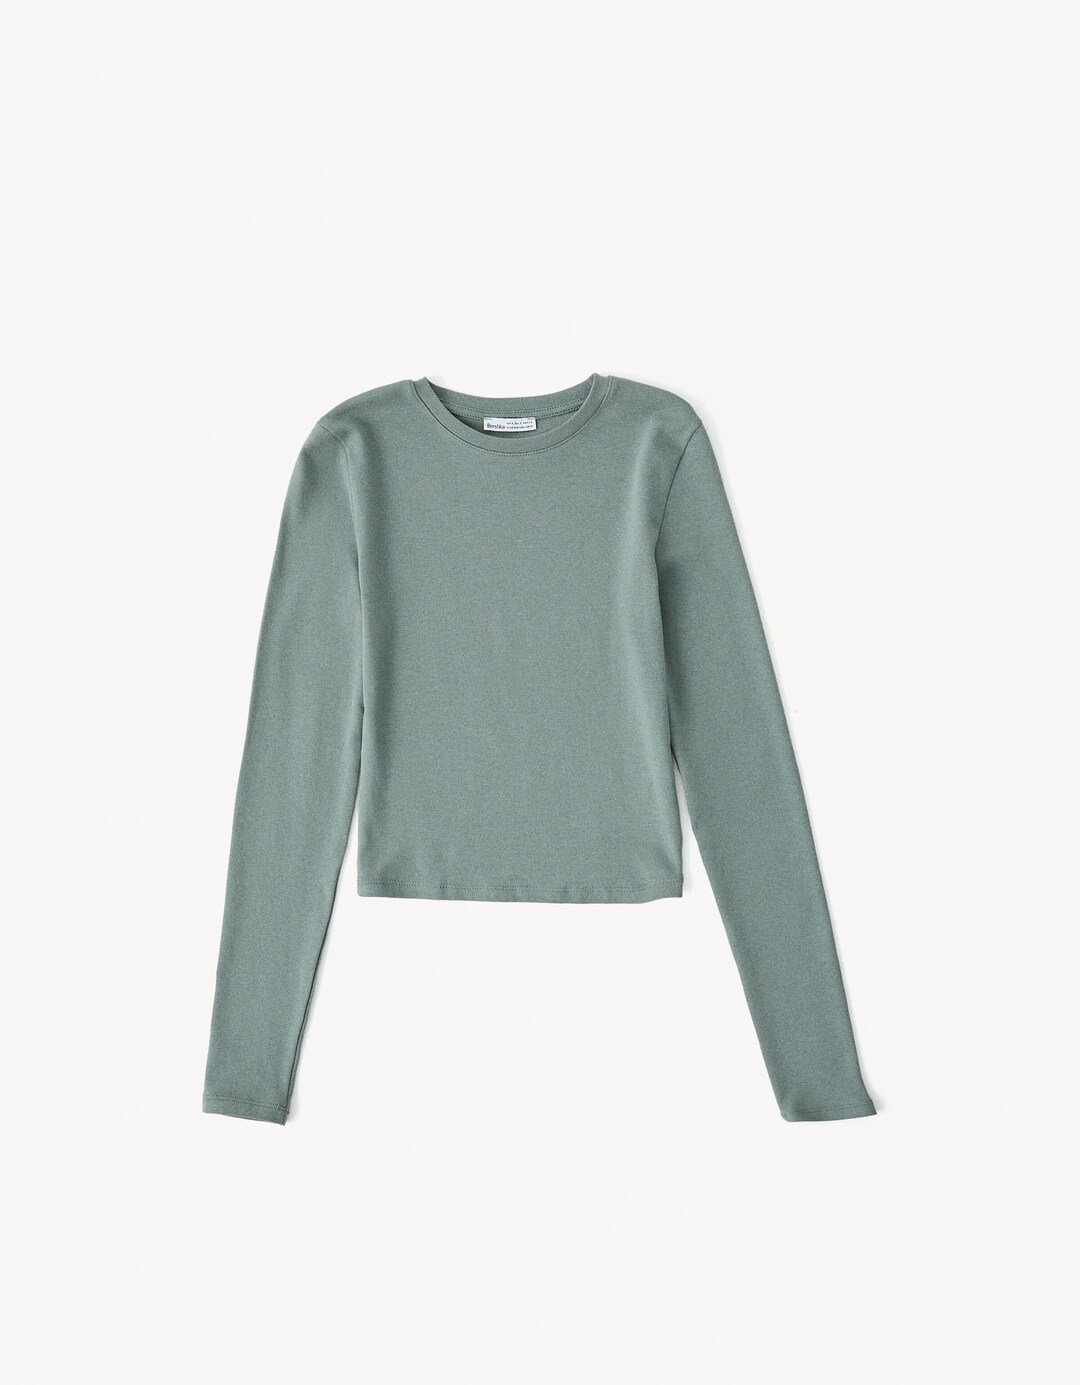 Long sleeve T-shirt with a round neck